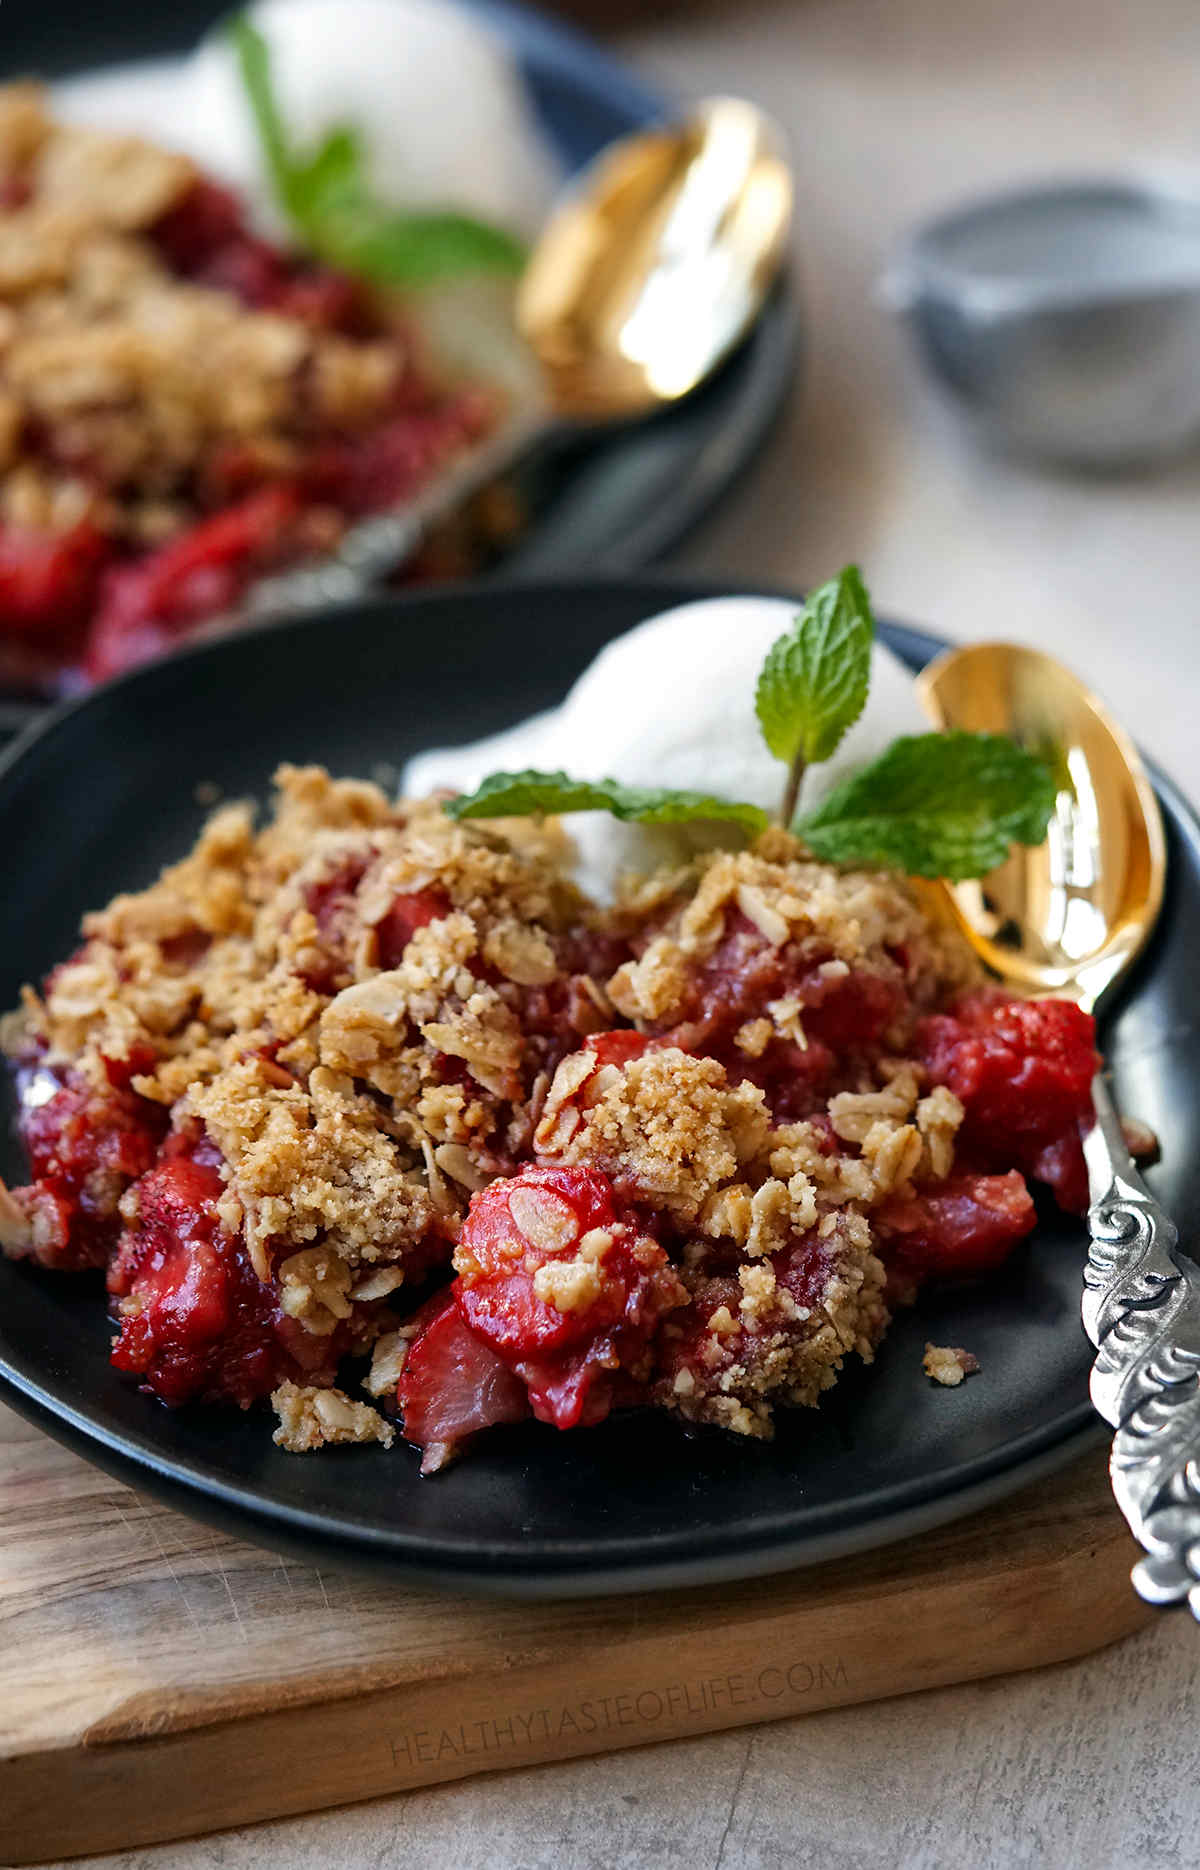 Strawberry crumble served with a scoop of vanilla ice cream and garnished with mint leaves.